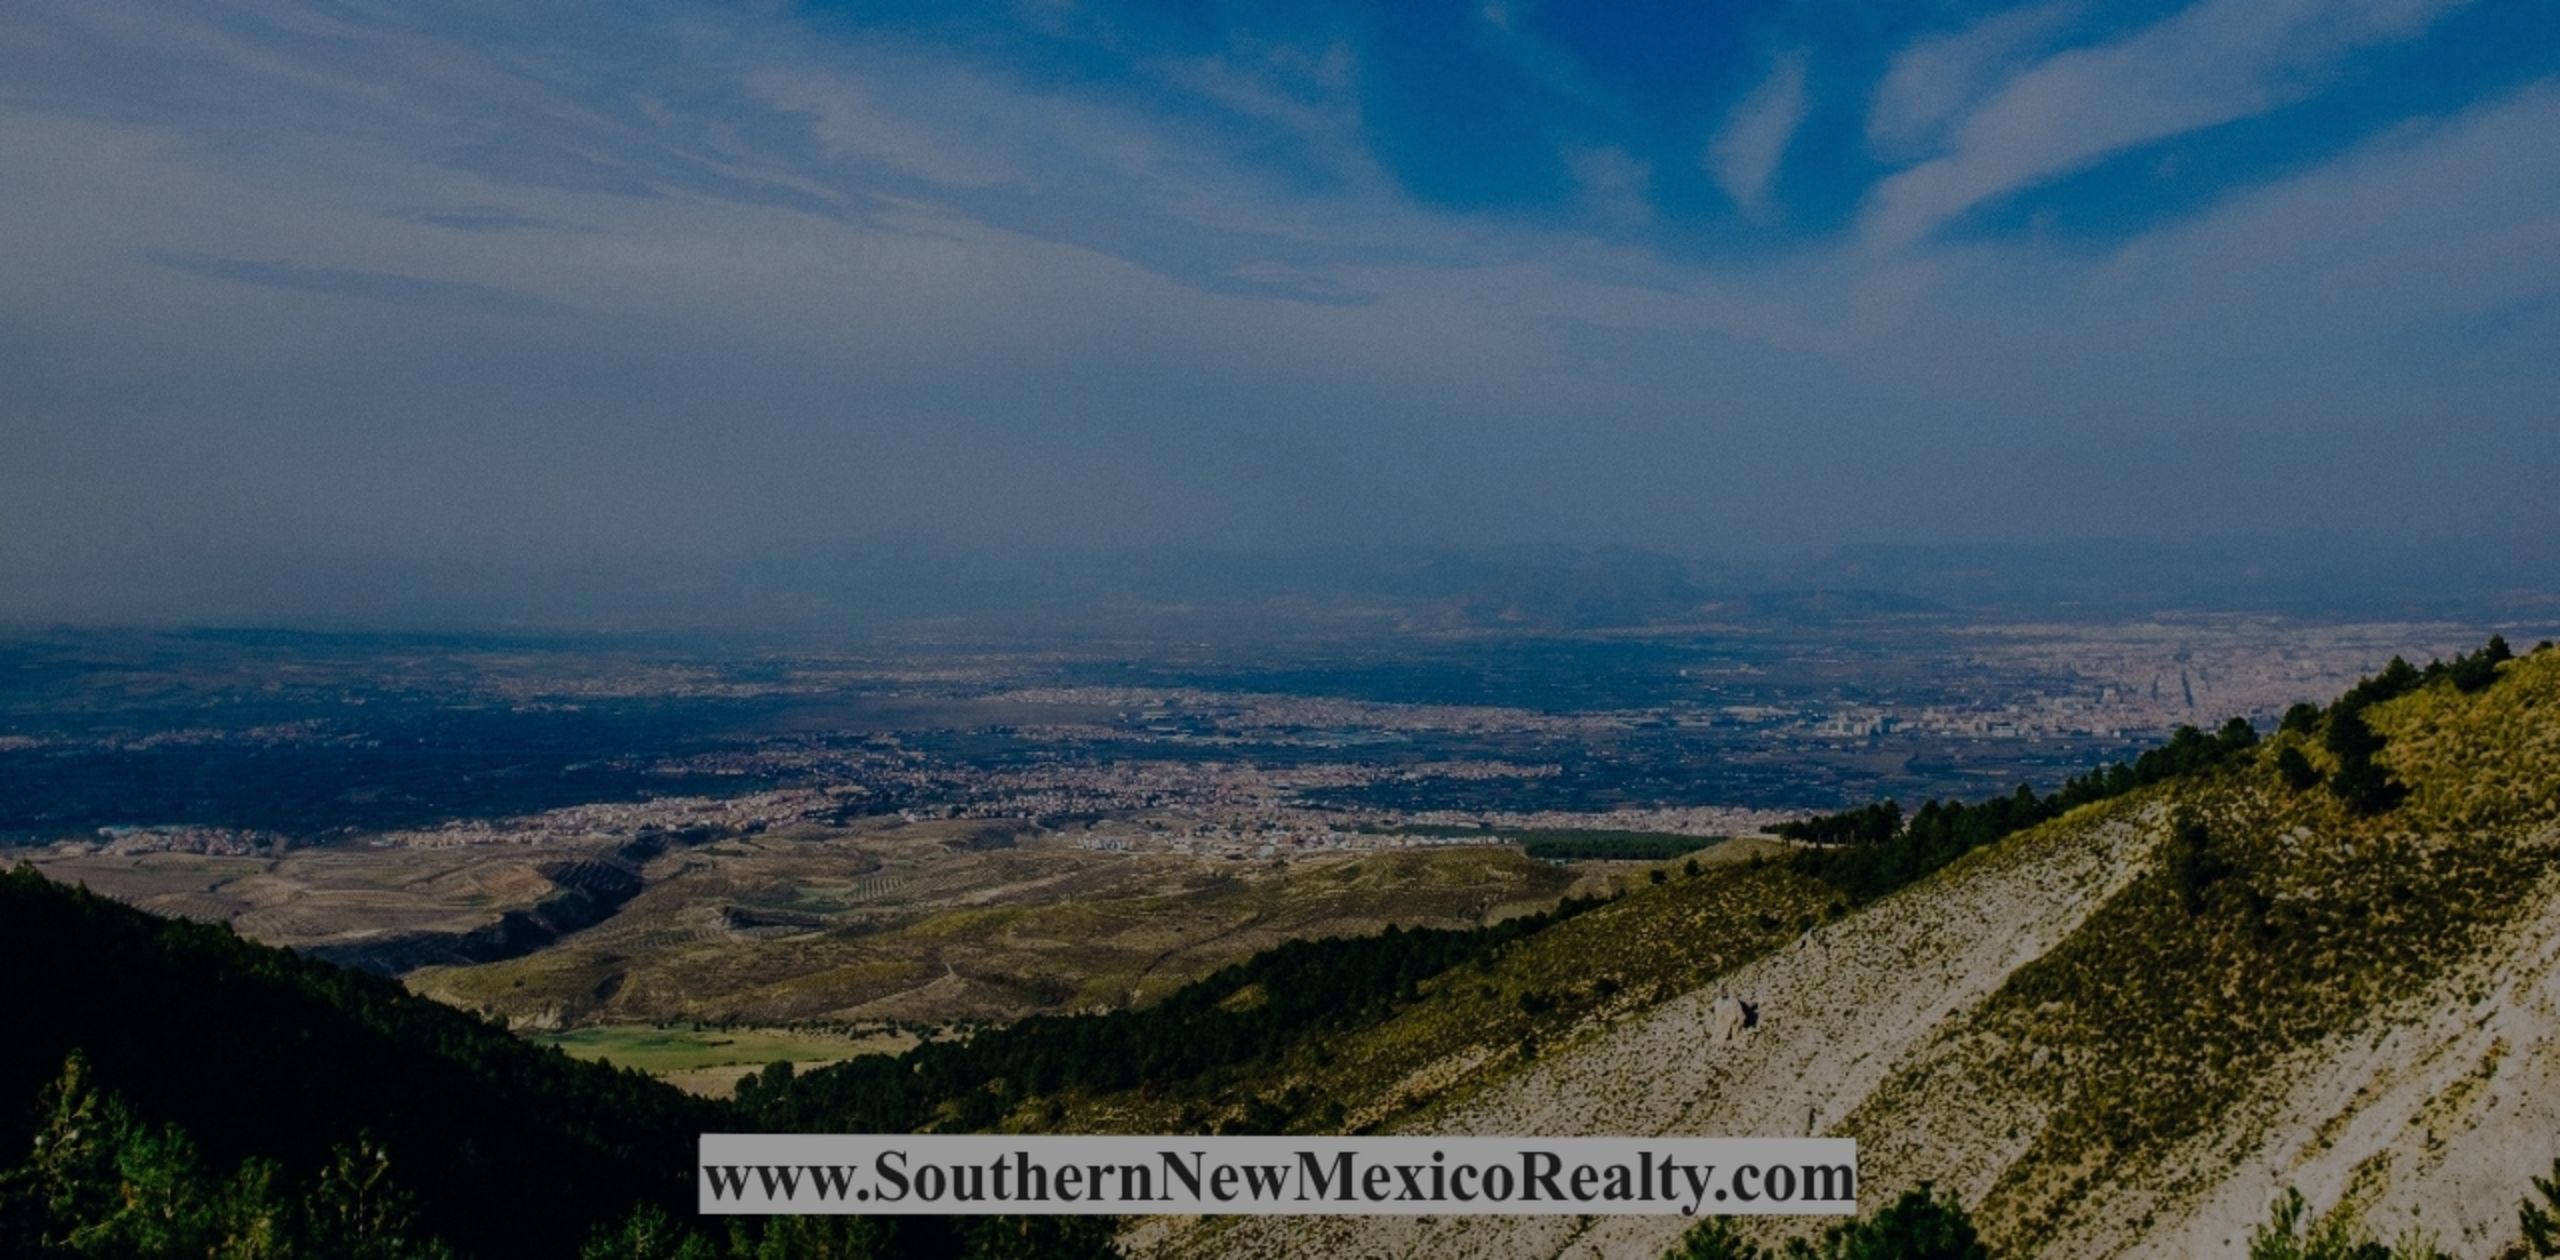 10 Reasons to Buy a New Home in Ruidoso, NM